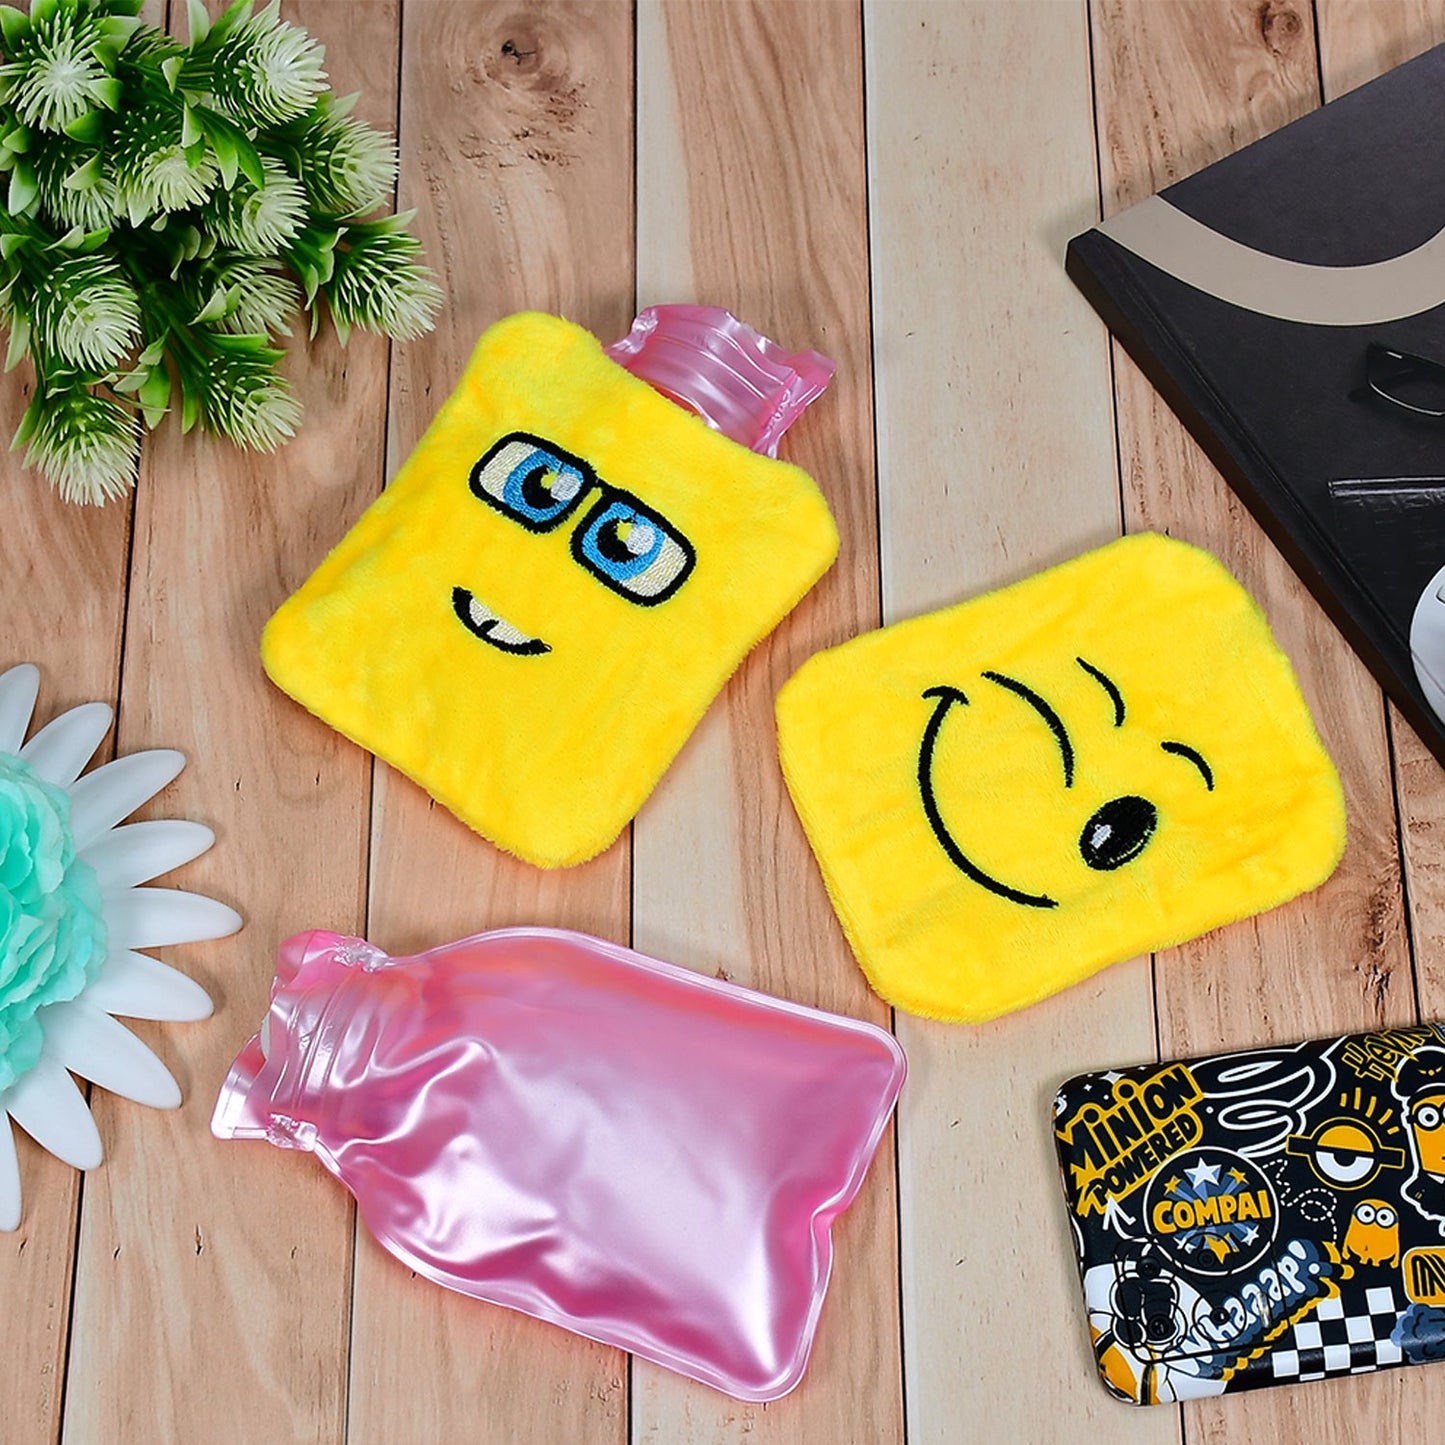 6535 1pc Mix Emoji designs small Hot Water Bag with Cover for Pain Relief, Neck, Shoulder Pain and Hand, Feet Warmer, Menstrual Cramps. 